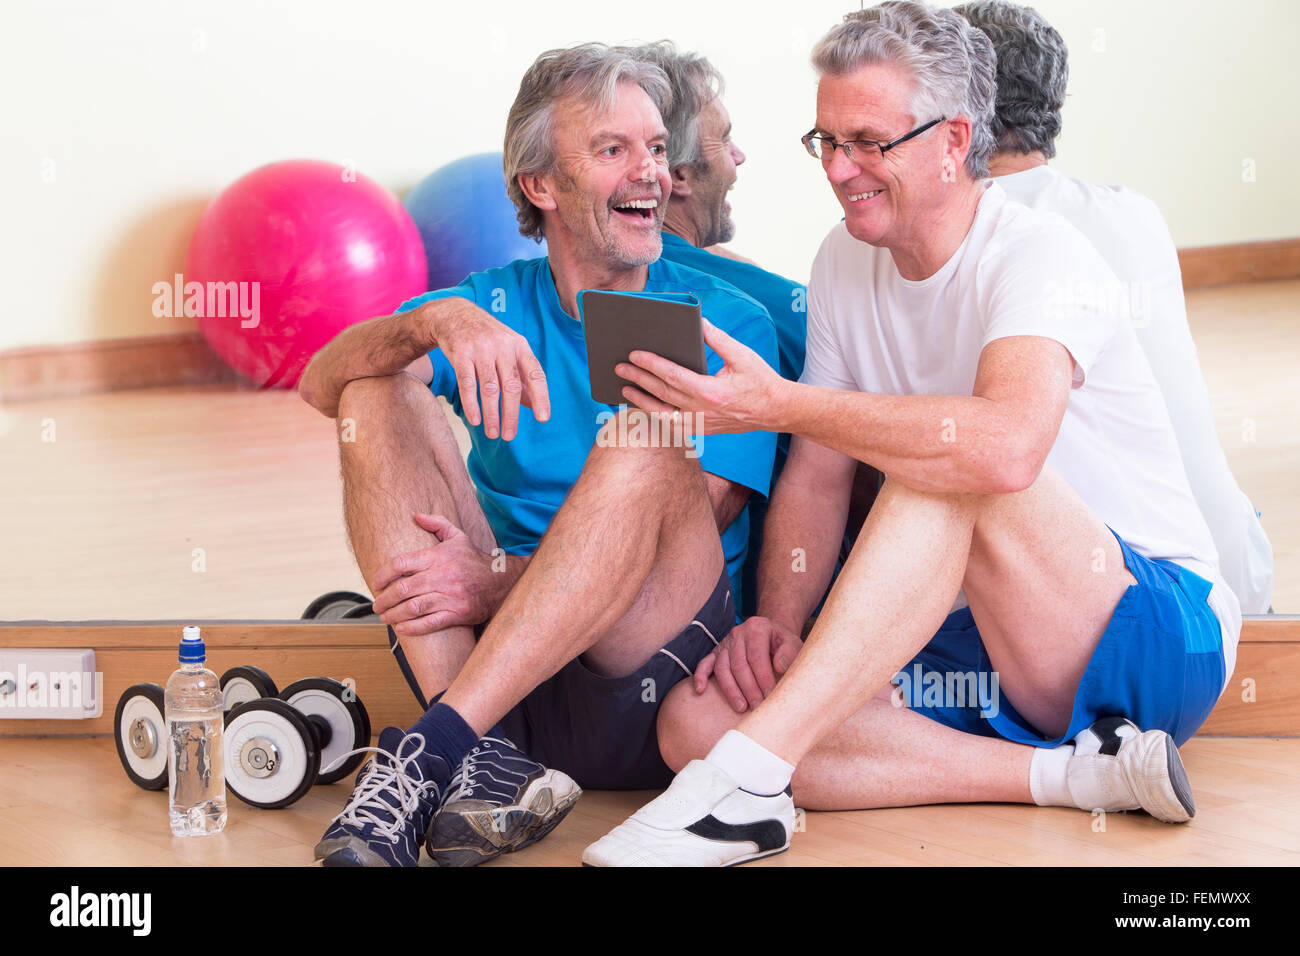 Senior men relxaing together after their workout at the gym Stock Photo